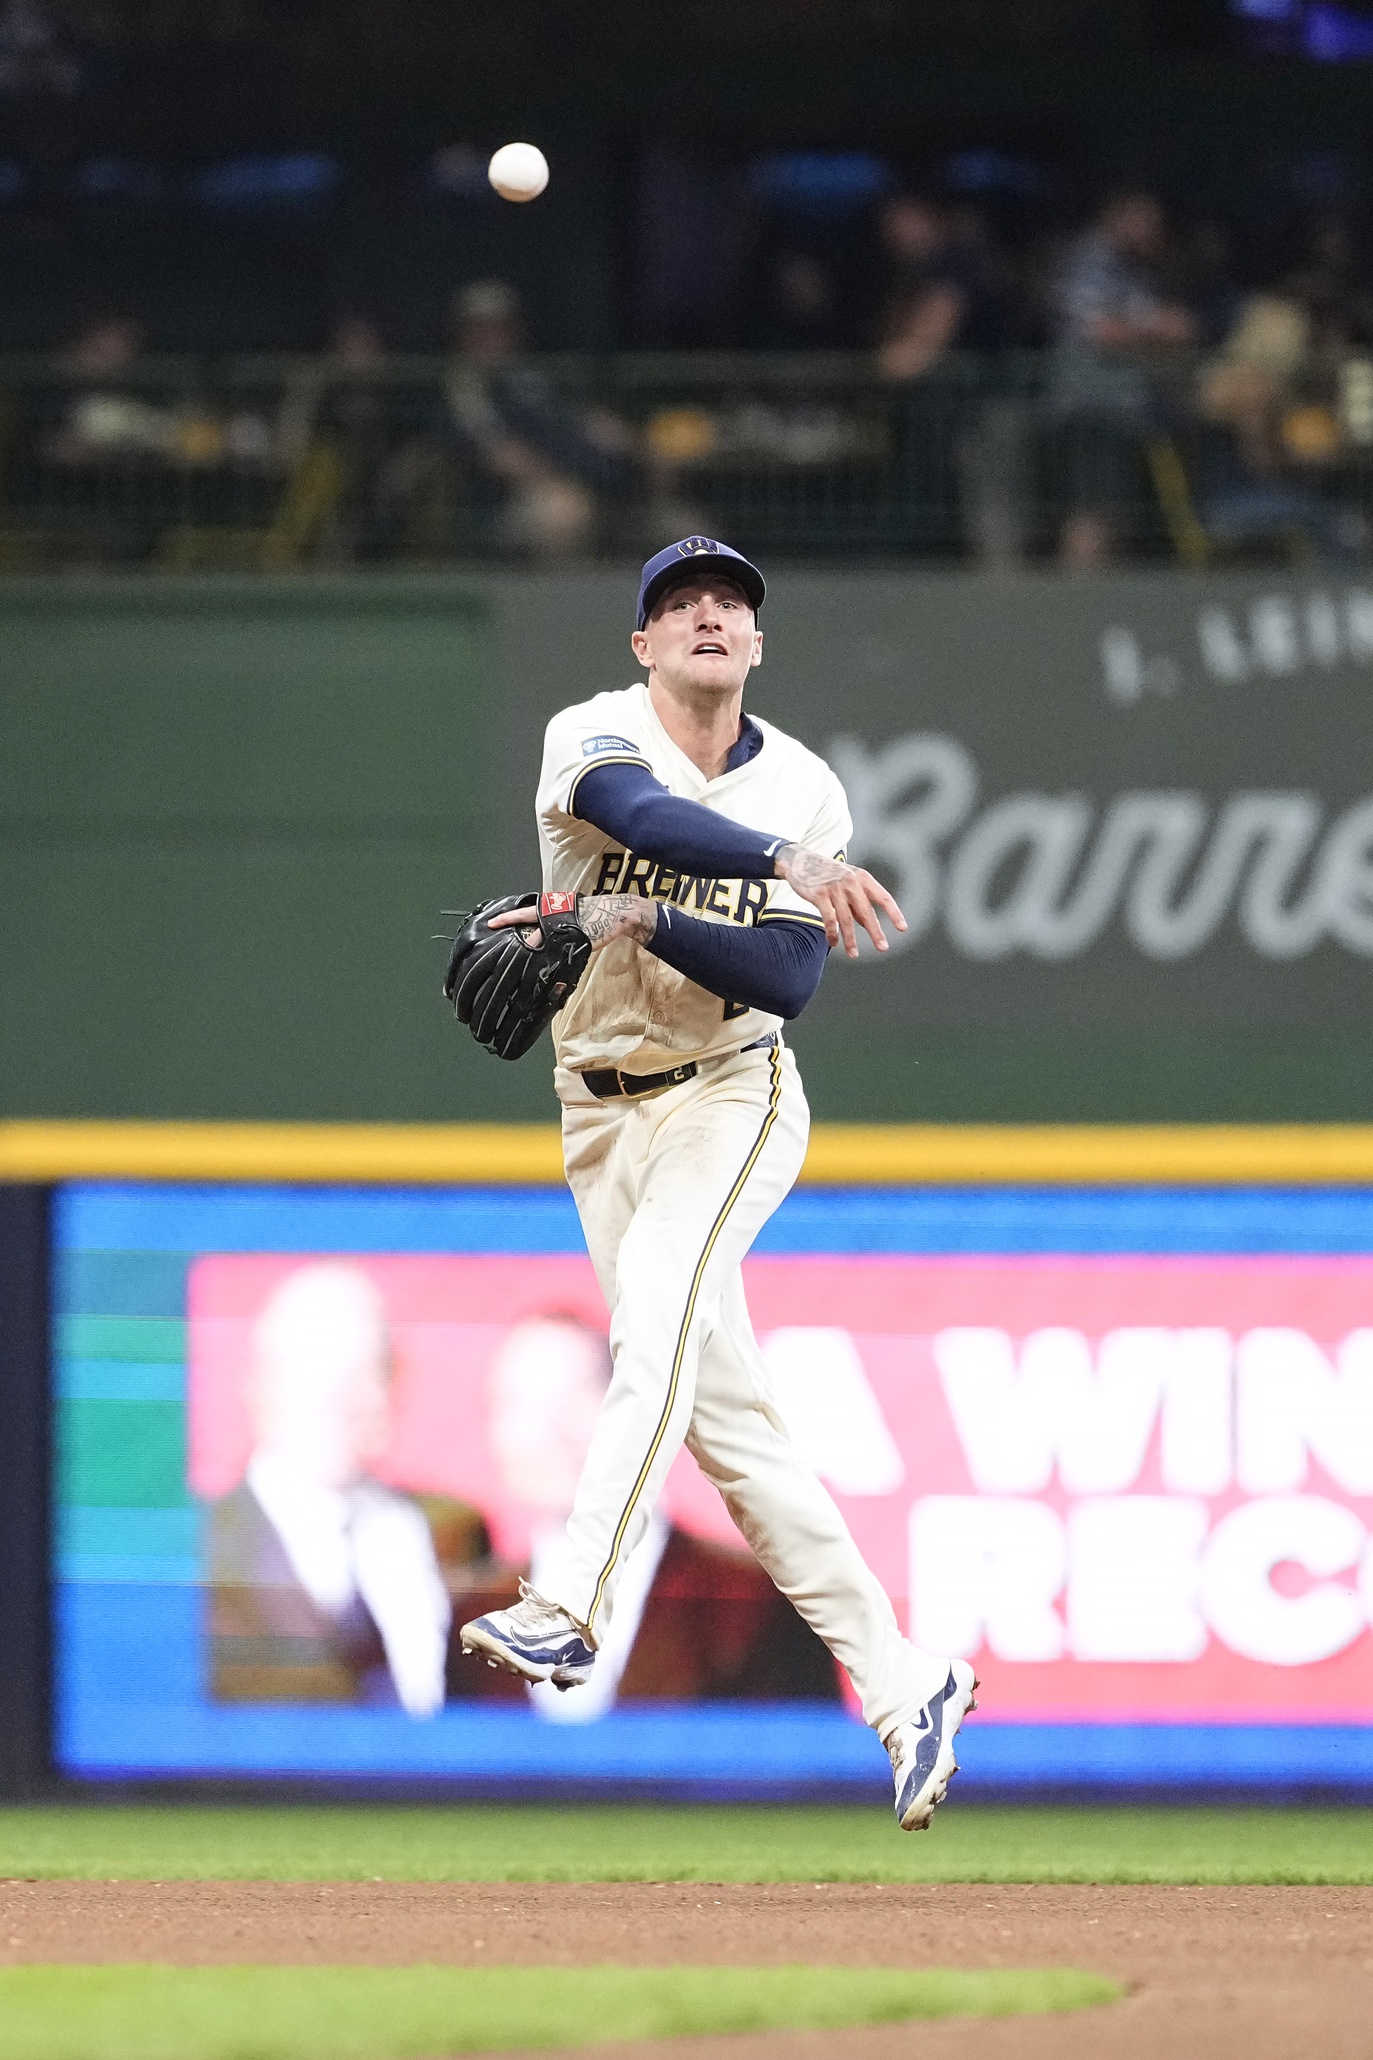 mlb picks Brice Turang Milwaukee Brewers predictions best bet odds